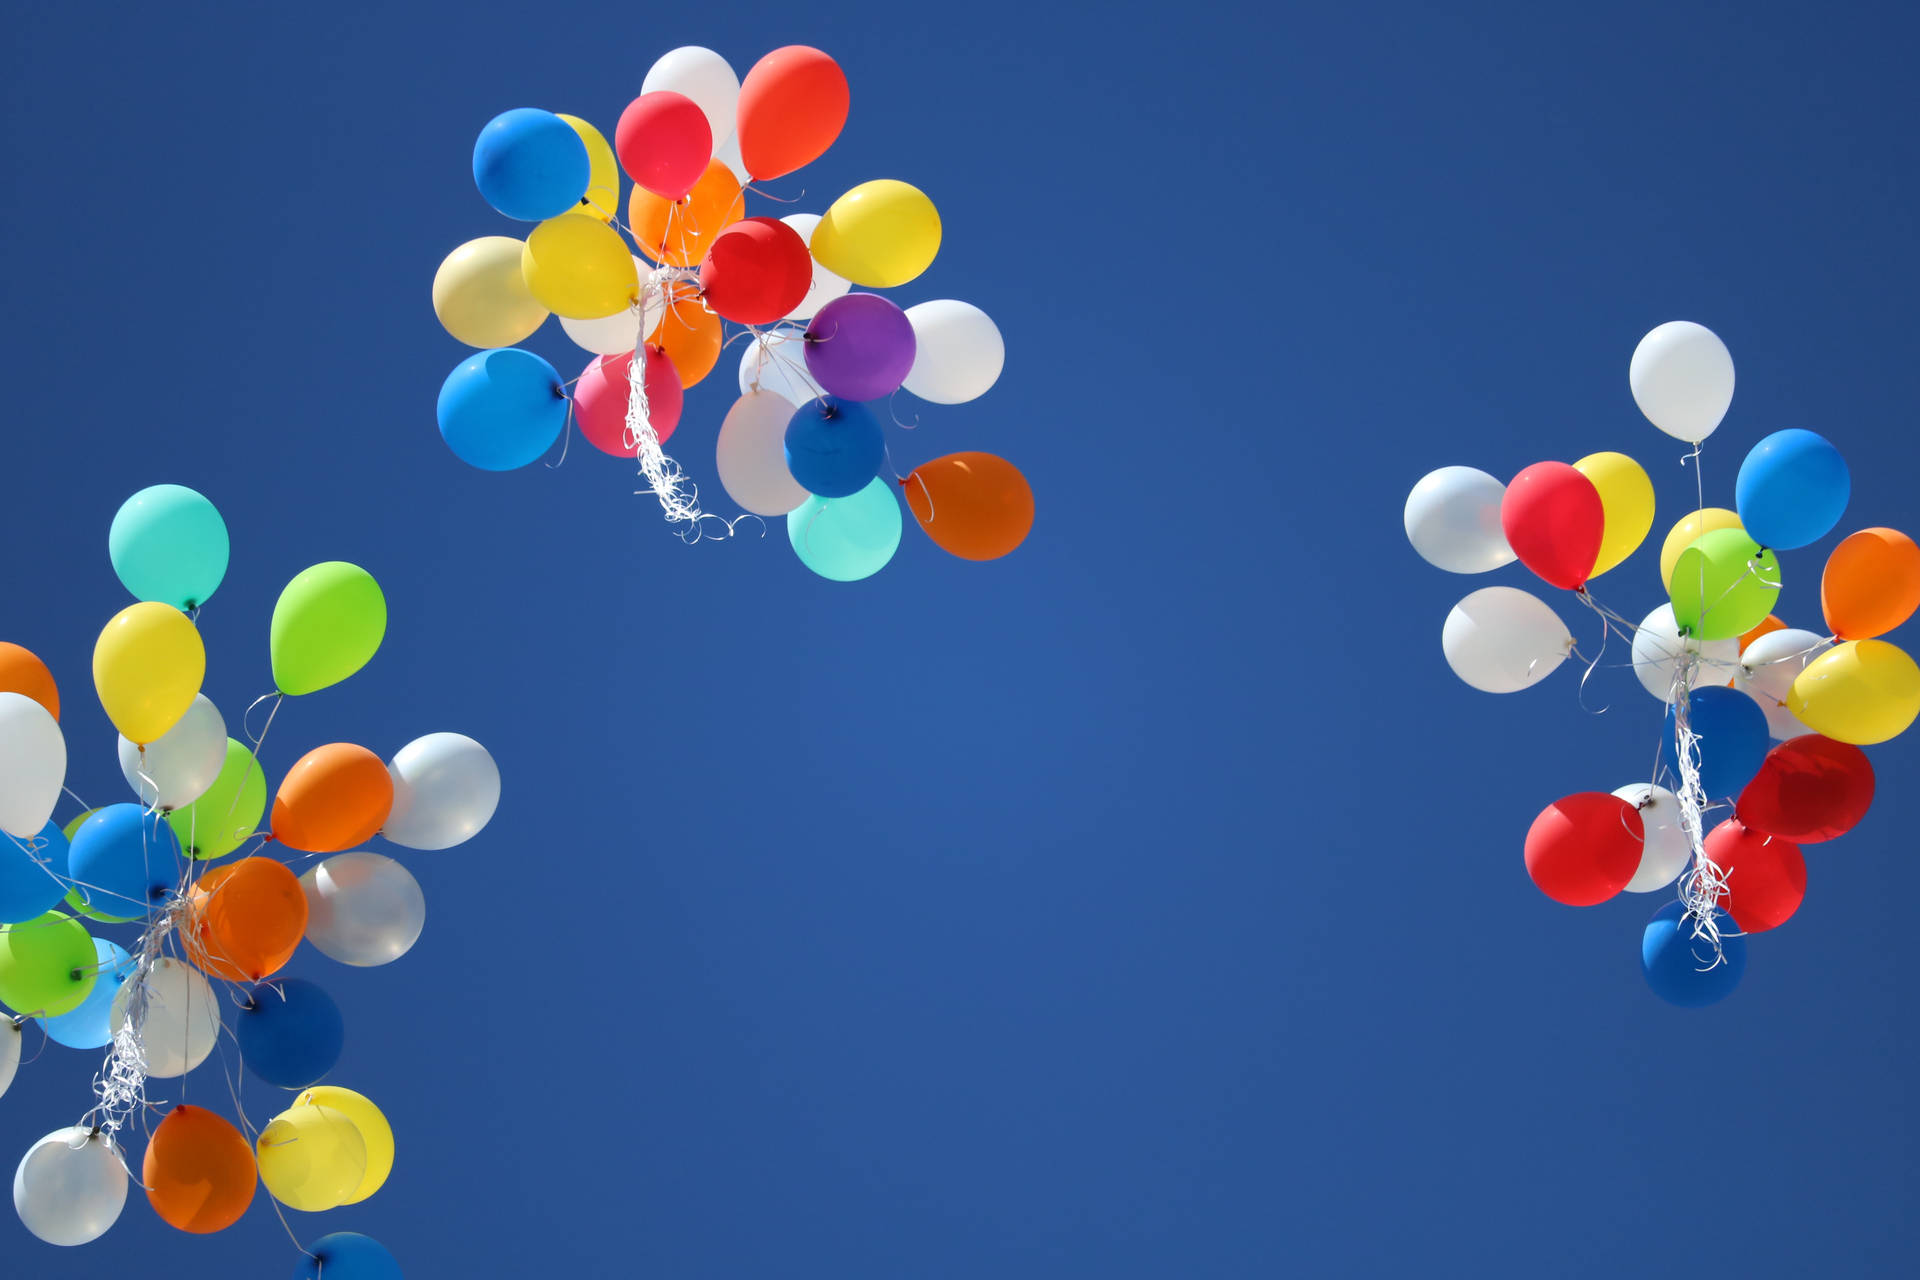 Three Cluster Balloons In Sky